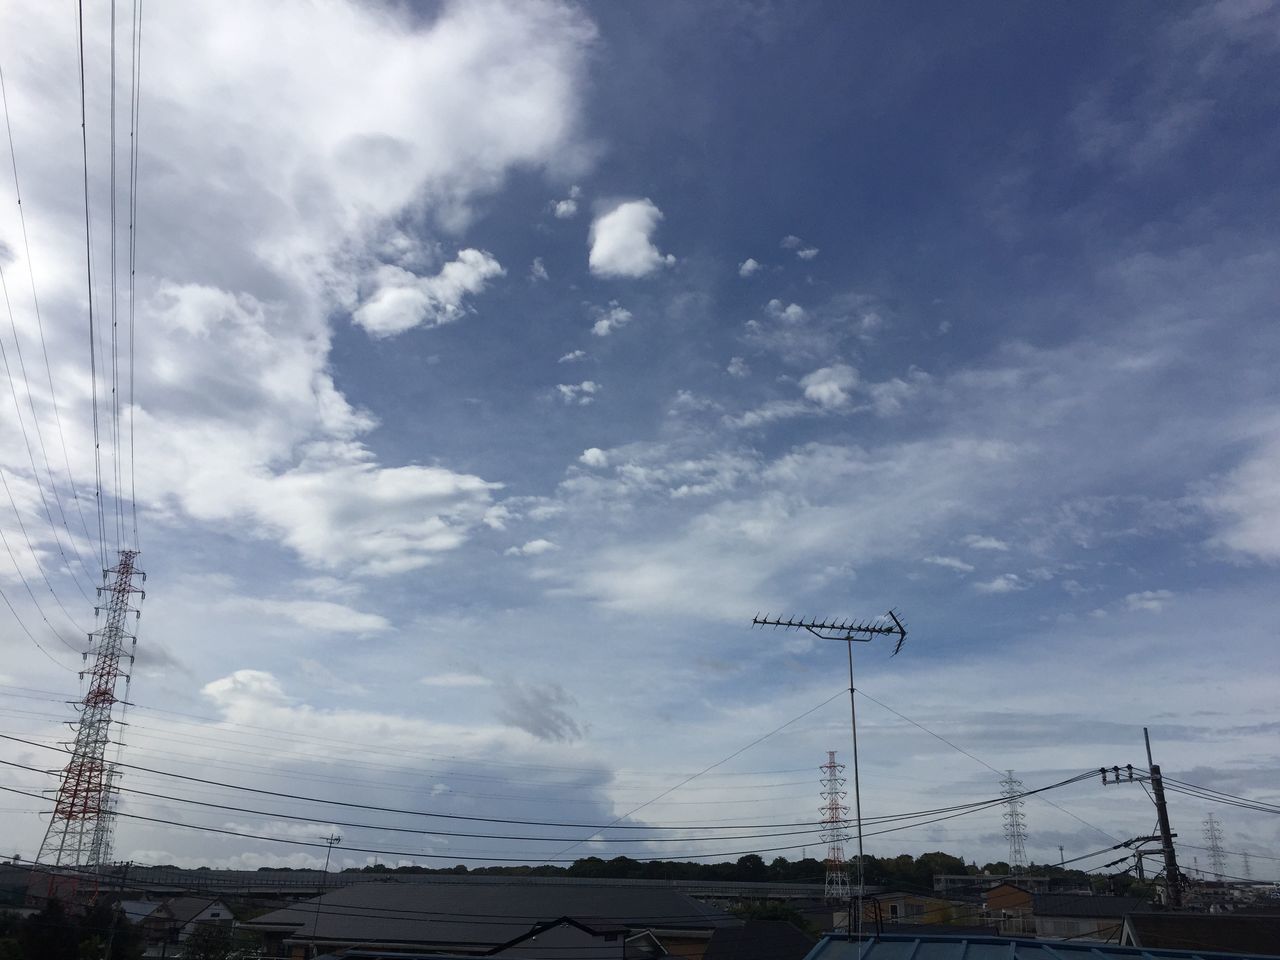 sky, cloud - sky, low angle view, power line, cloudy, electricity pylon, connection, electricity, cable, transportation, cloud, power supply, fuel and power generation, mode of transport, technology, day, outdoors, no people, built structure, mast